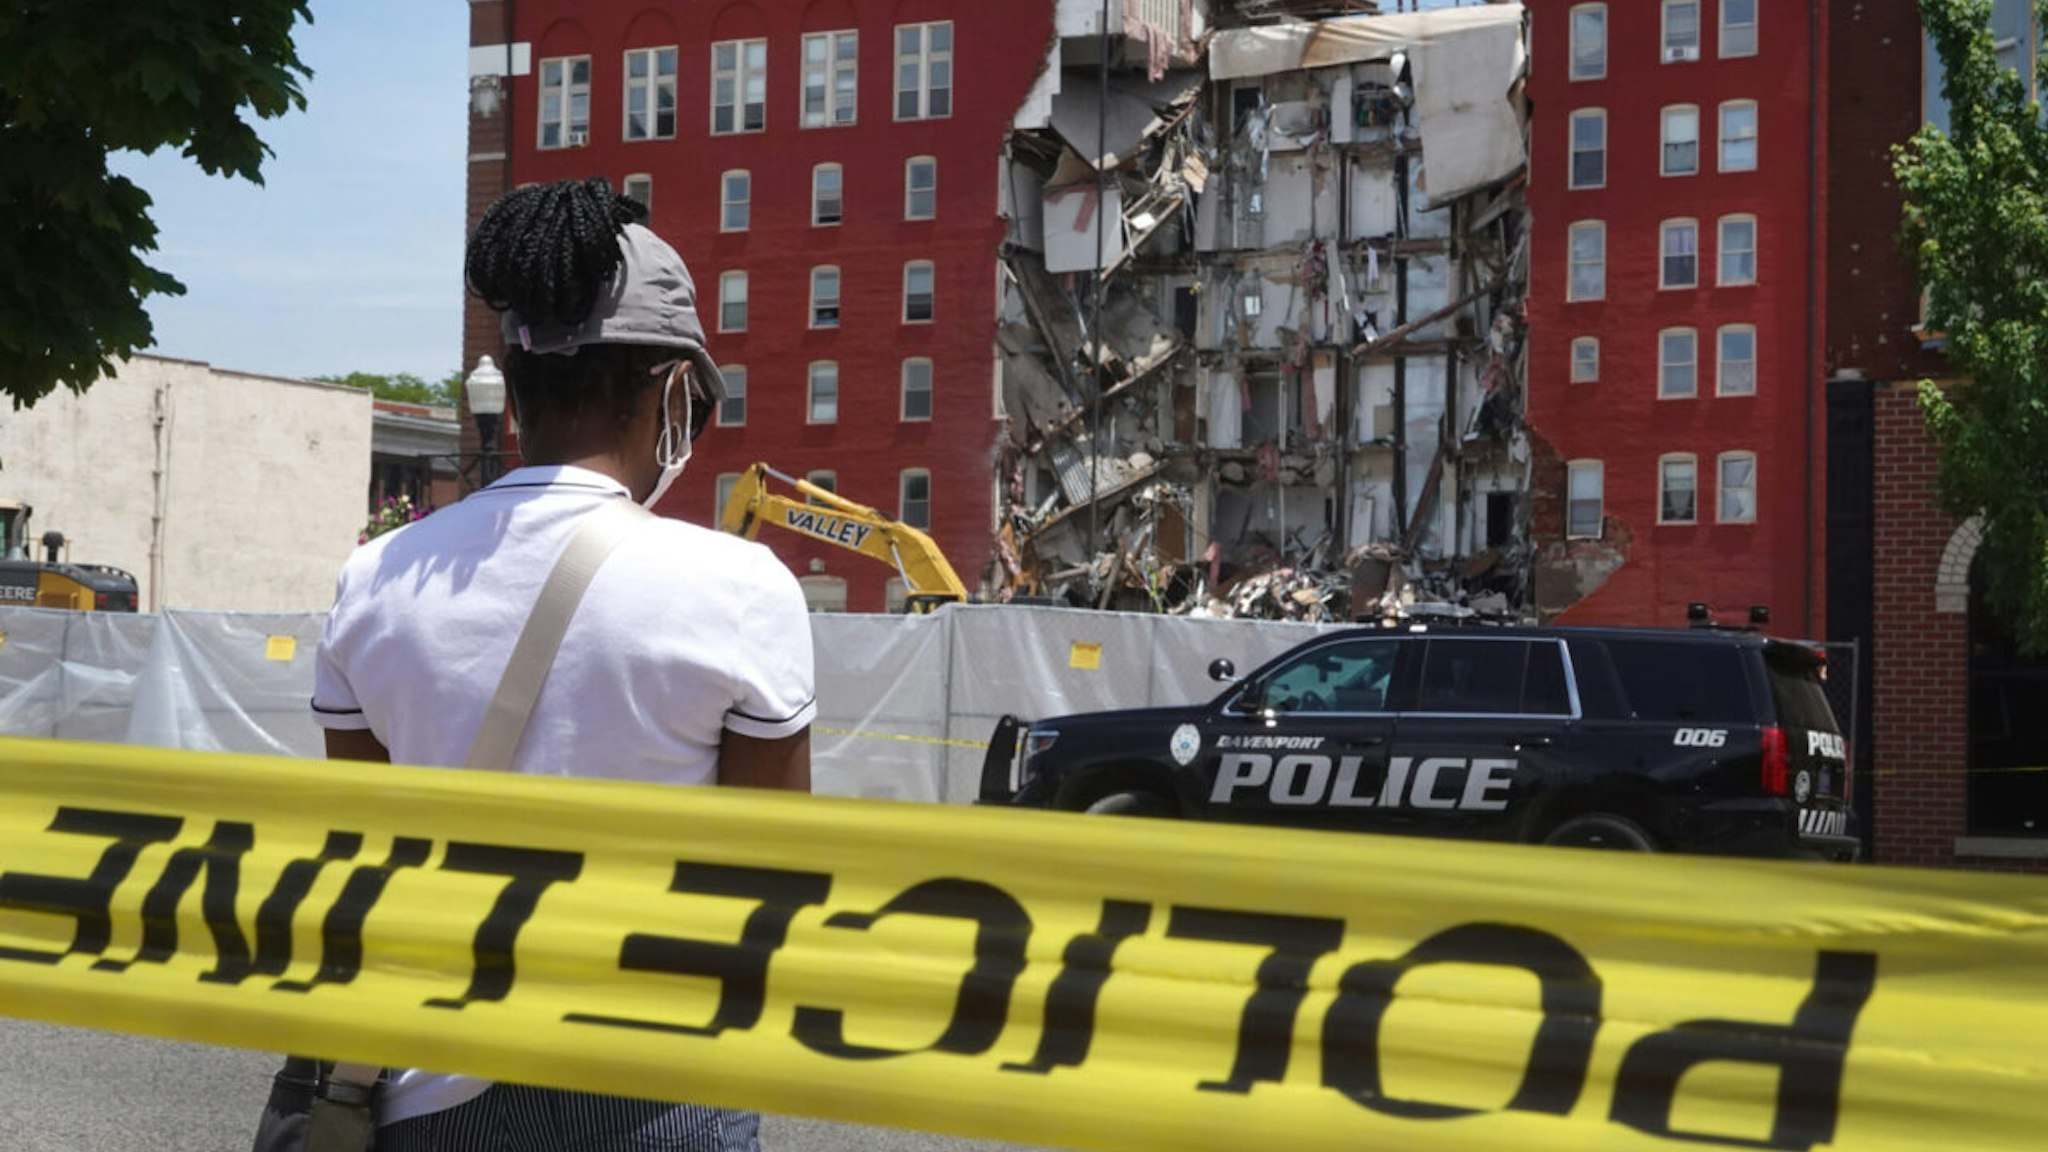 DAVENPORT, IOWA - MAY 29: People view a six-story apartment building after it collapsed yesterday on May 29, 2023 in Davenport, Iowa. Eight people were rescued from the debris following the collapse yesterday afternoon.